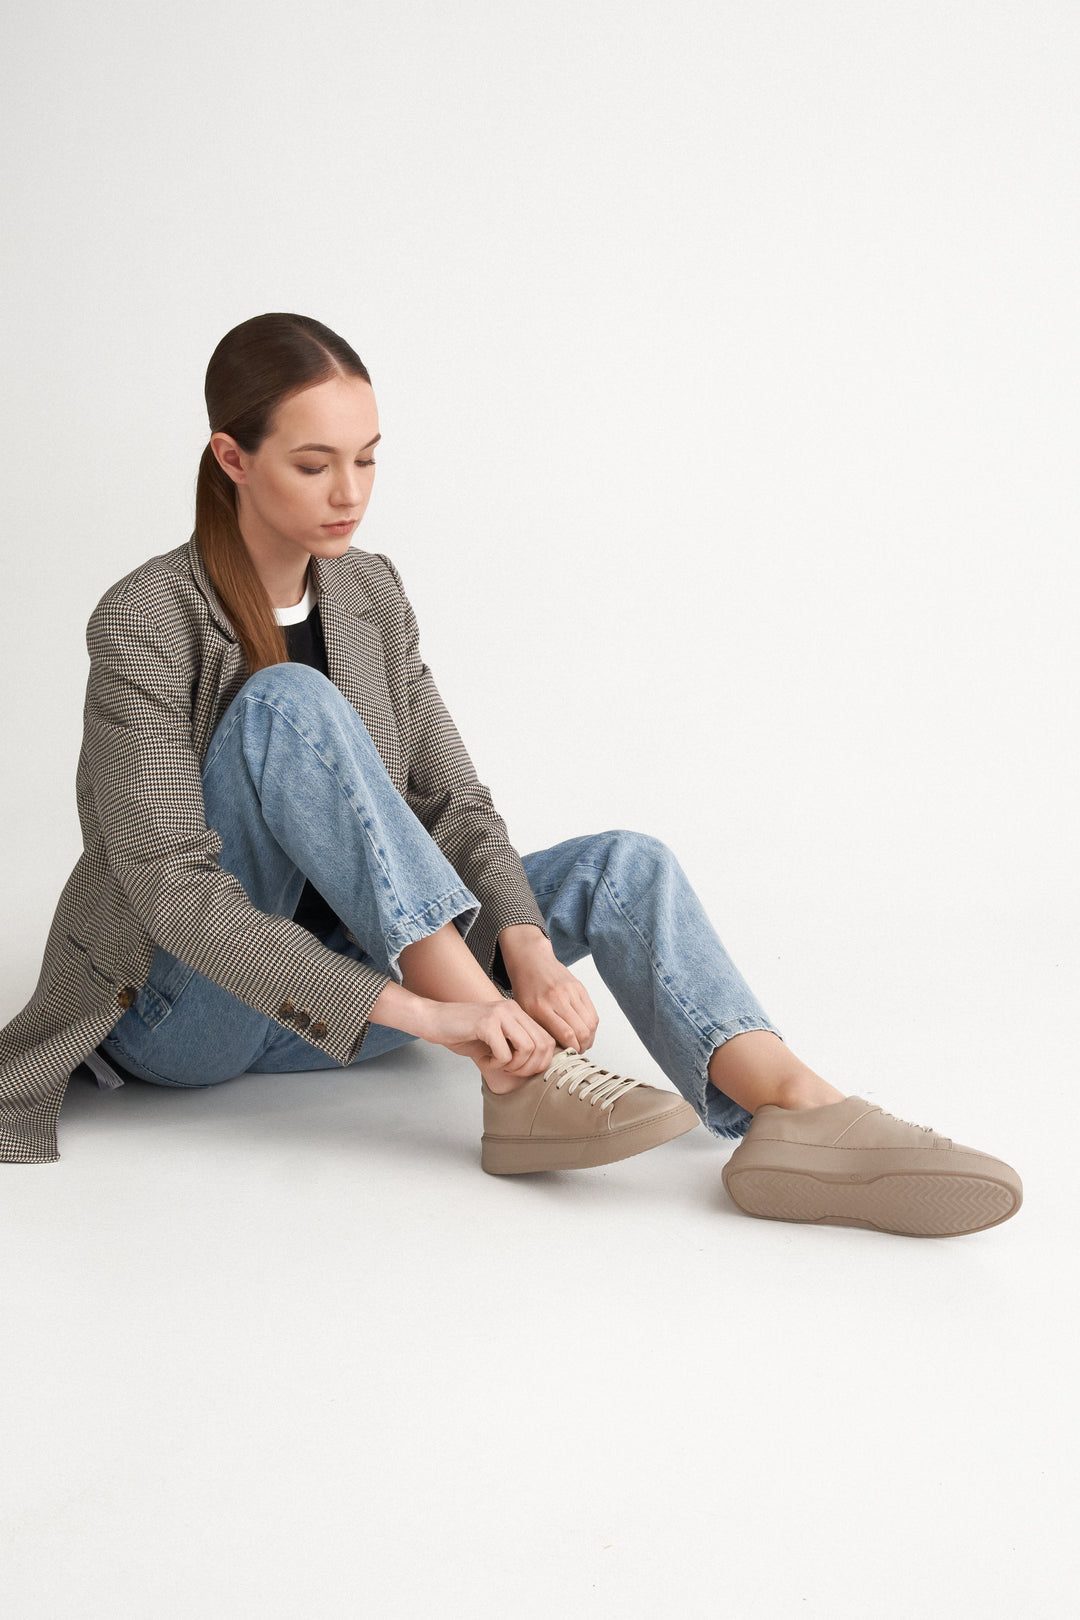 Women's beige Estro sneakers made of genuine leather - footwear in a complete outfit.